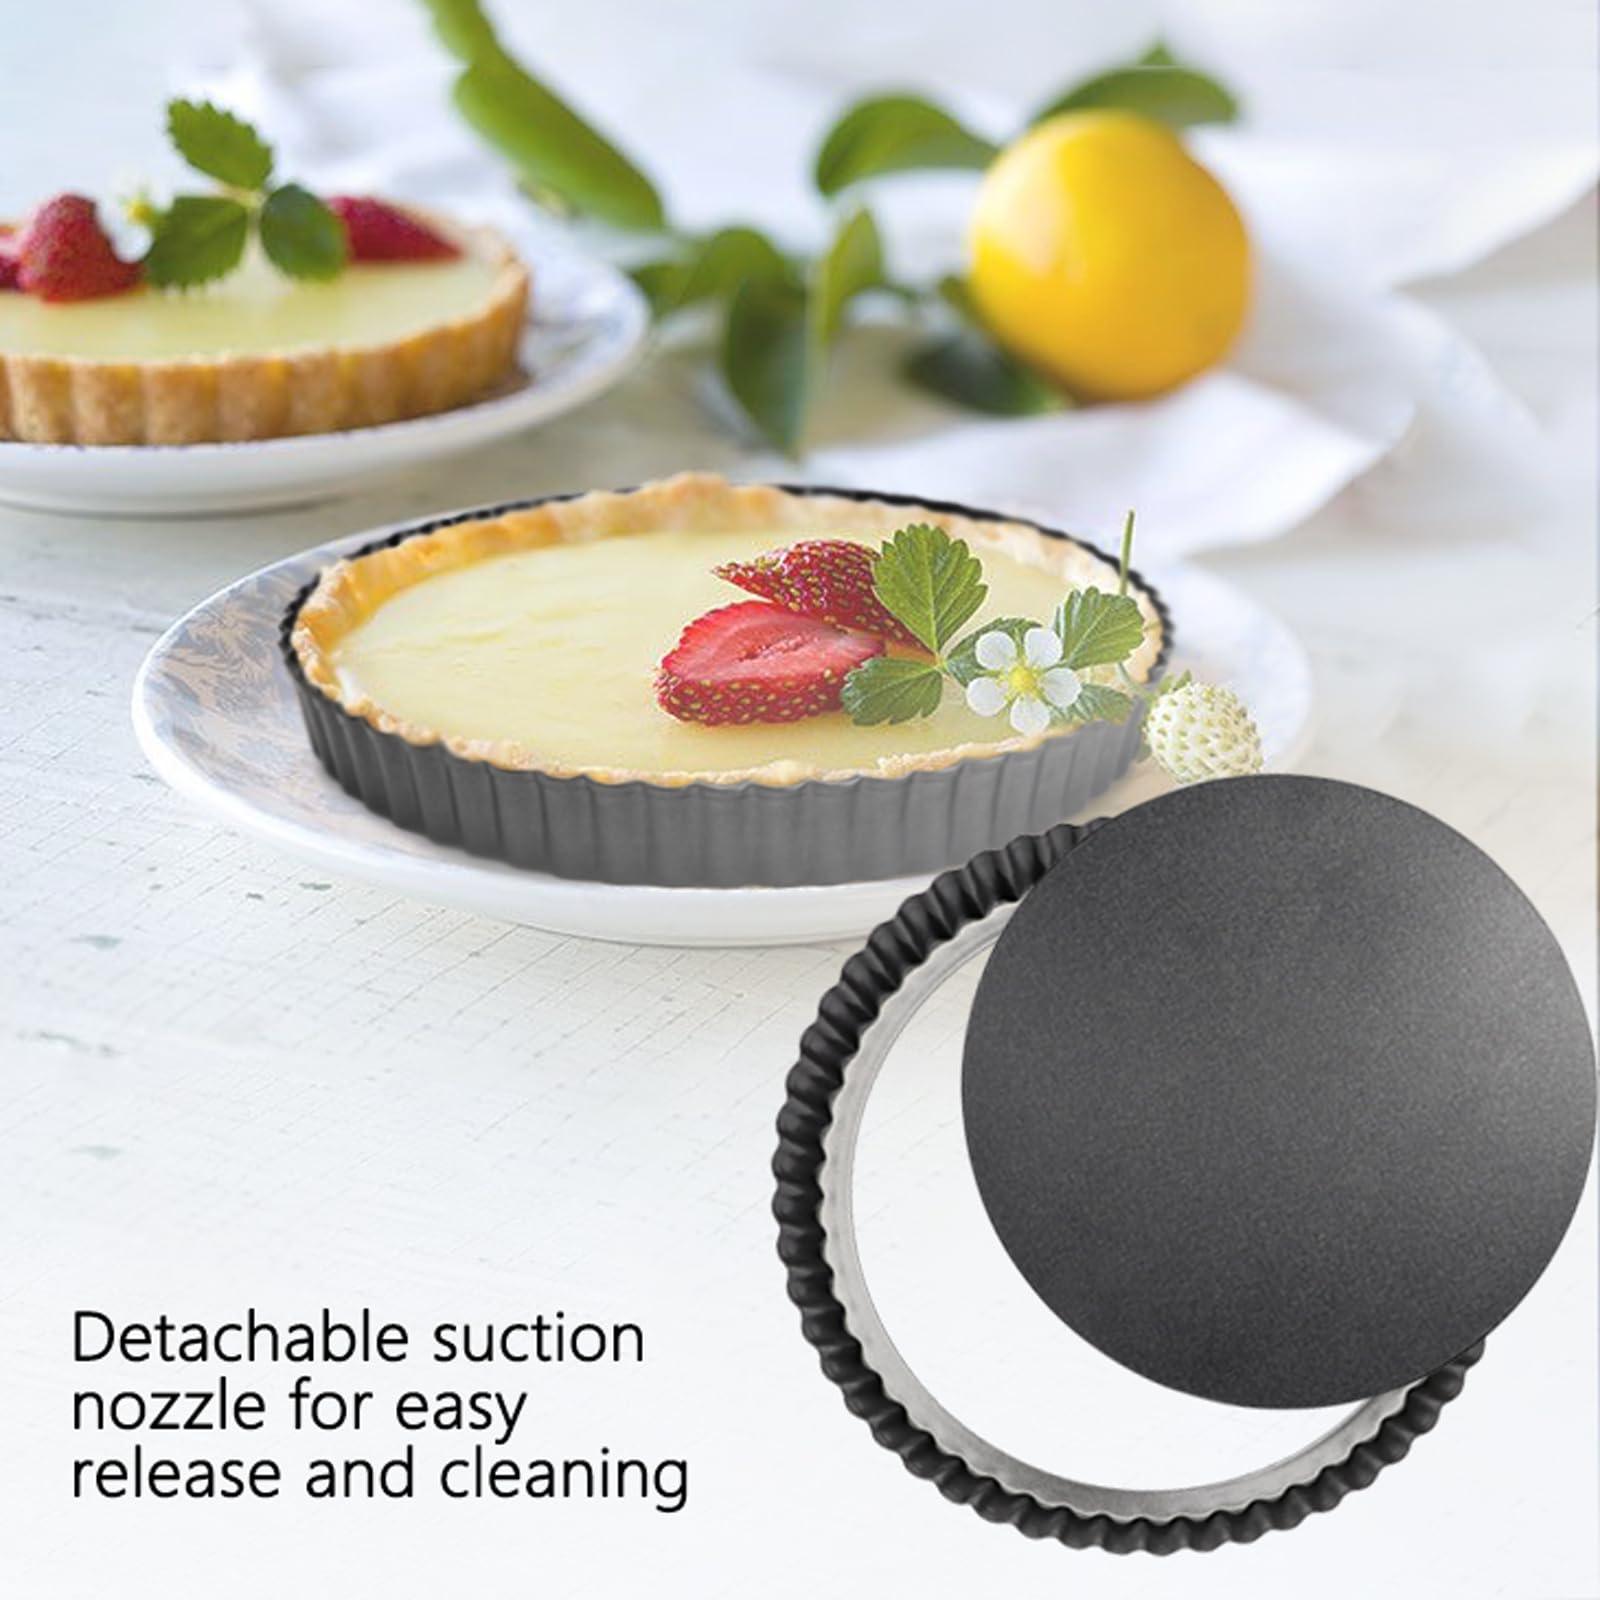 Tart Pan 2 Pack Large Tart Pans with Removable Bottoms Round Nonstick Quiche Pan Carbon Steel Tart Pans for Baking (Set of 2) - CookCave